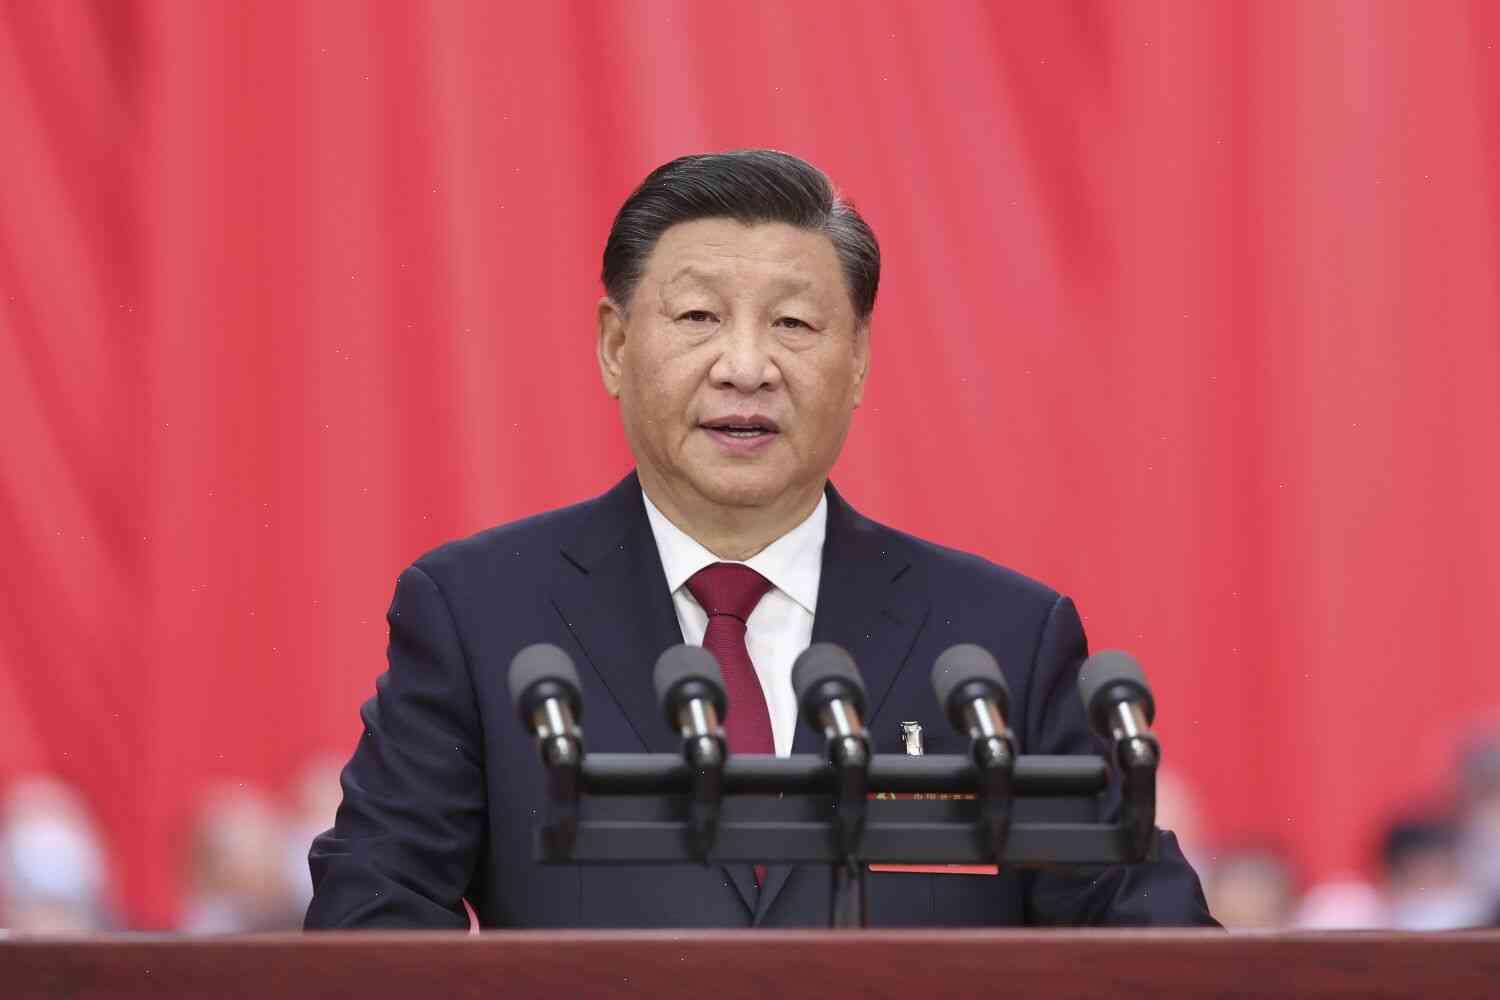 Xi Jinping’s Second Term Is a Must-See